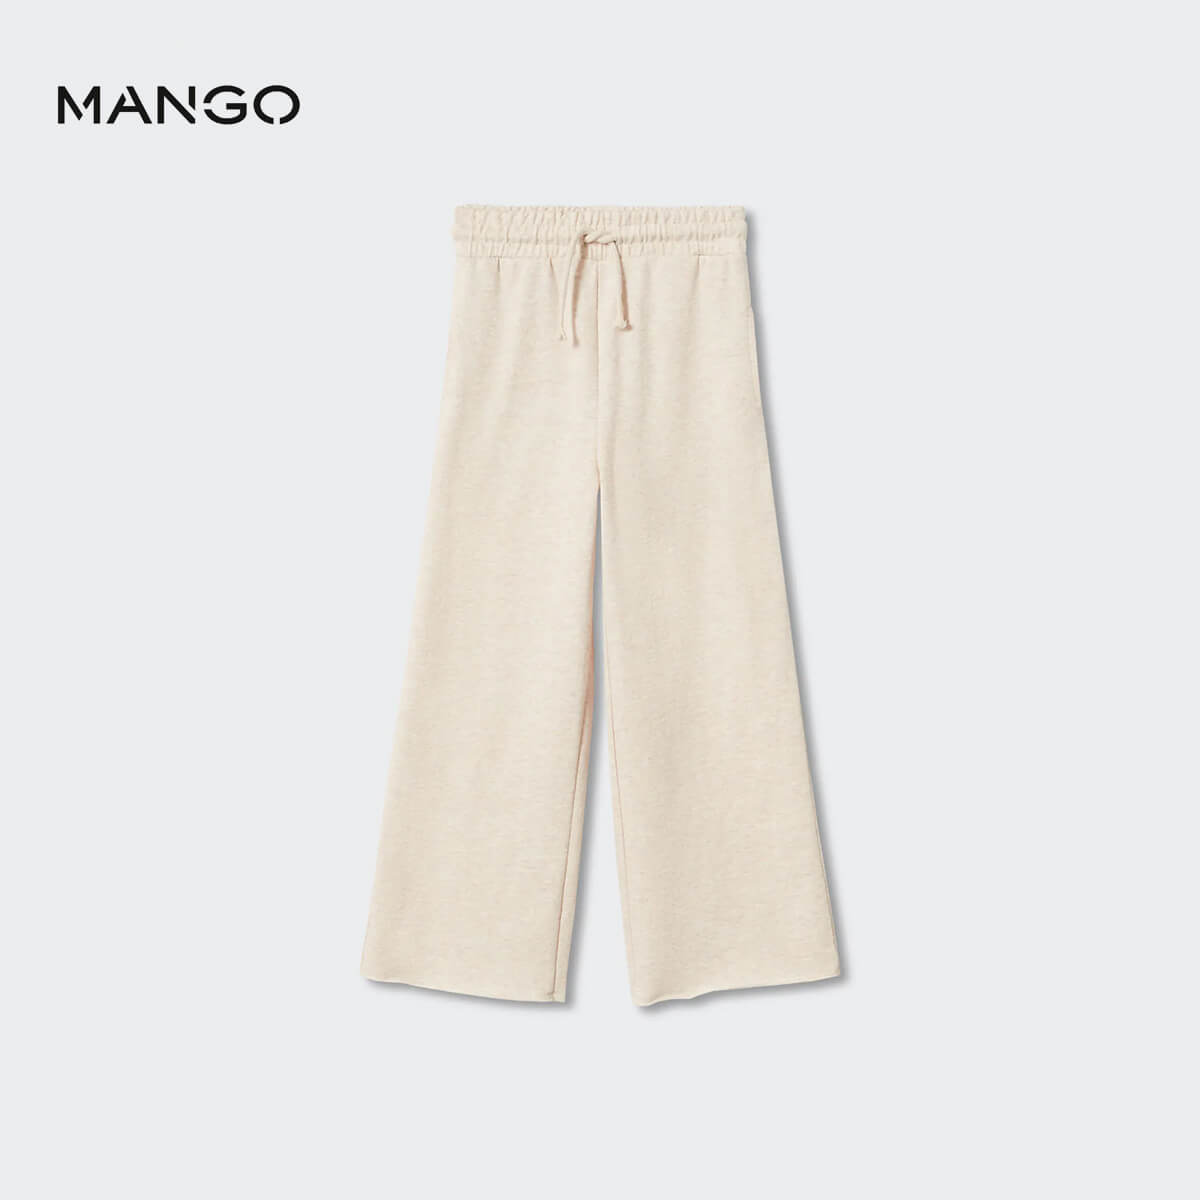 Mango Ticket Ankle Grazer Culotte Trousers, Natural White, XS